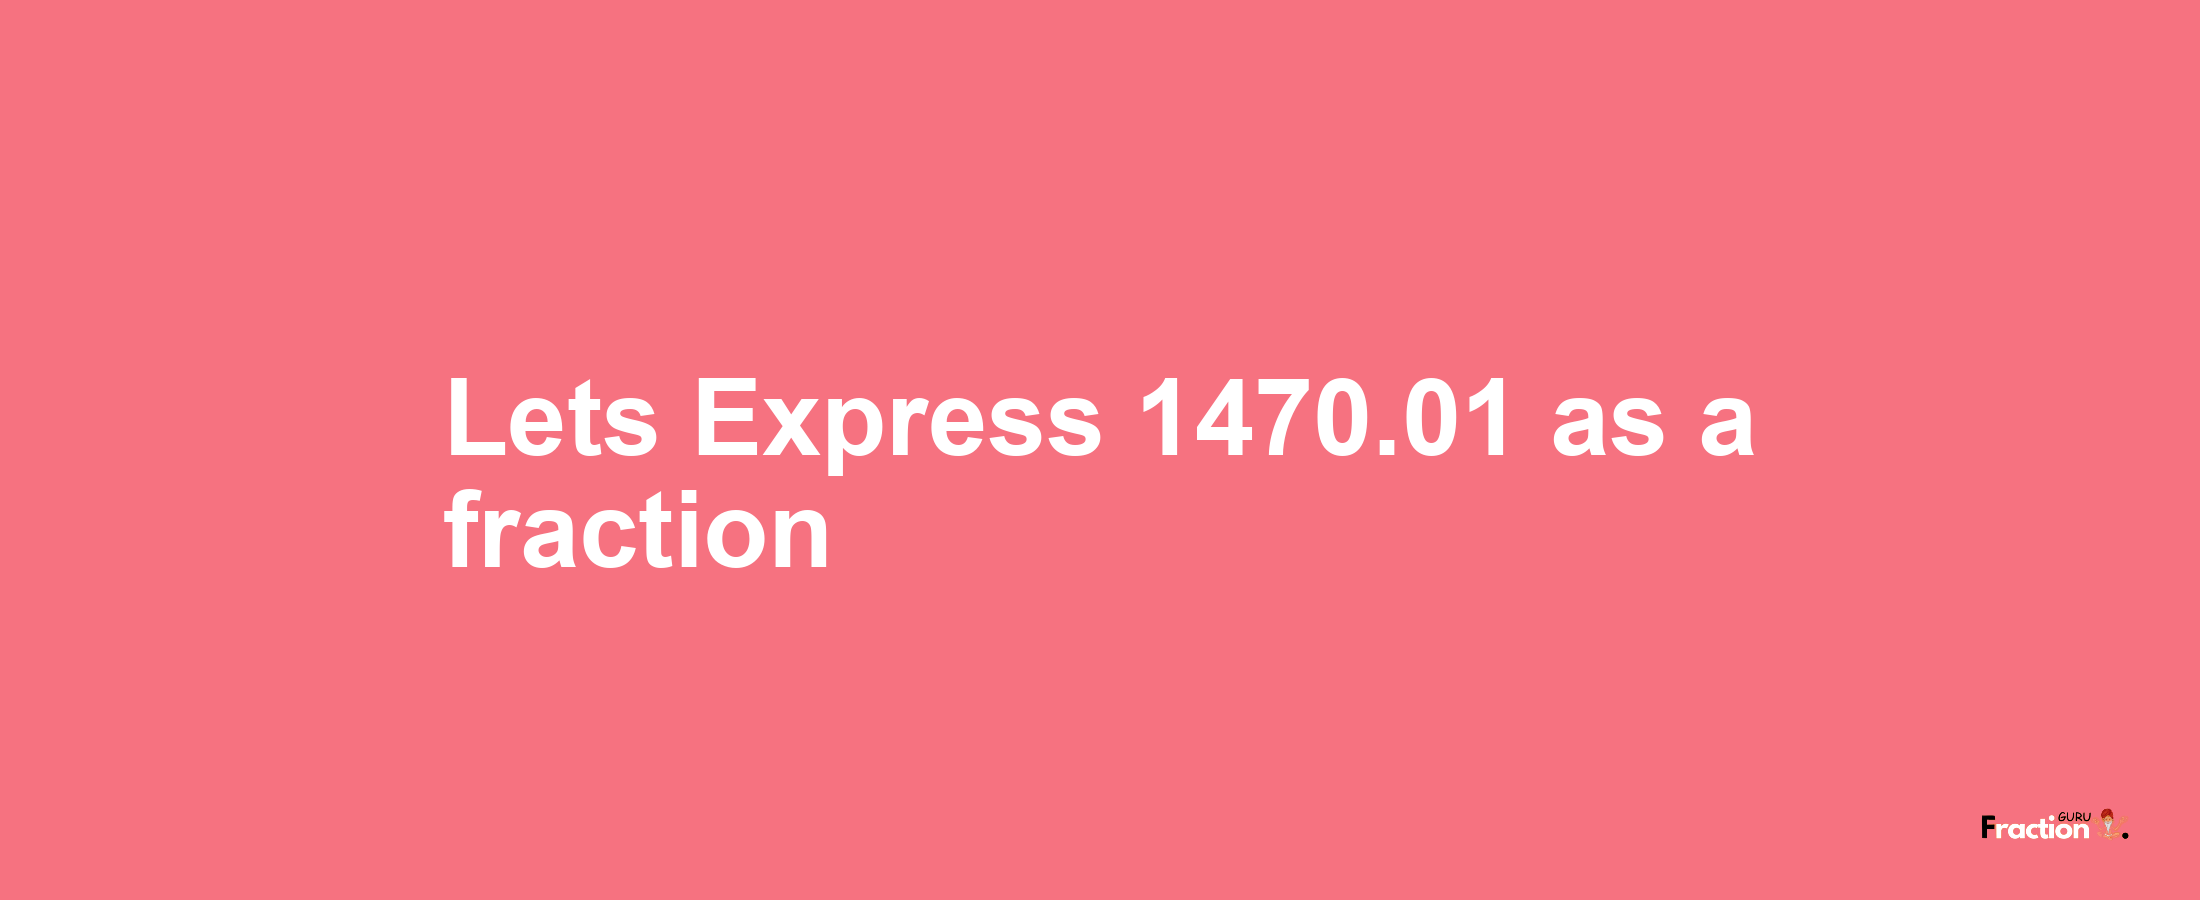 Lets Express 1470.01 as afraction